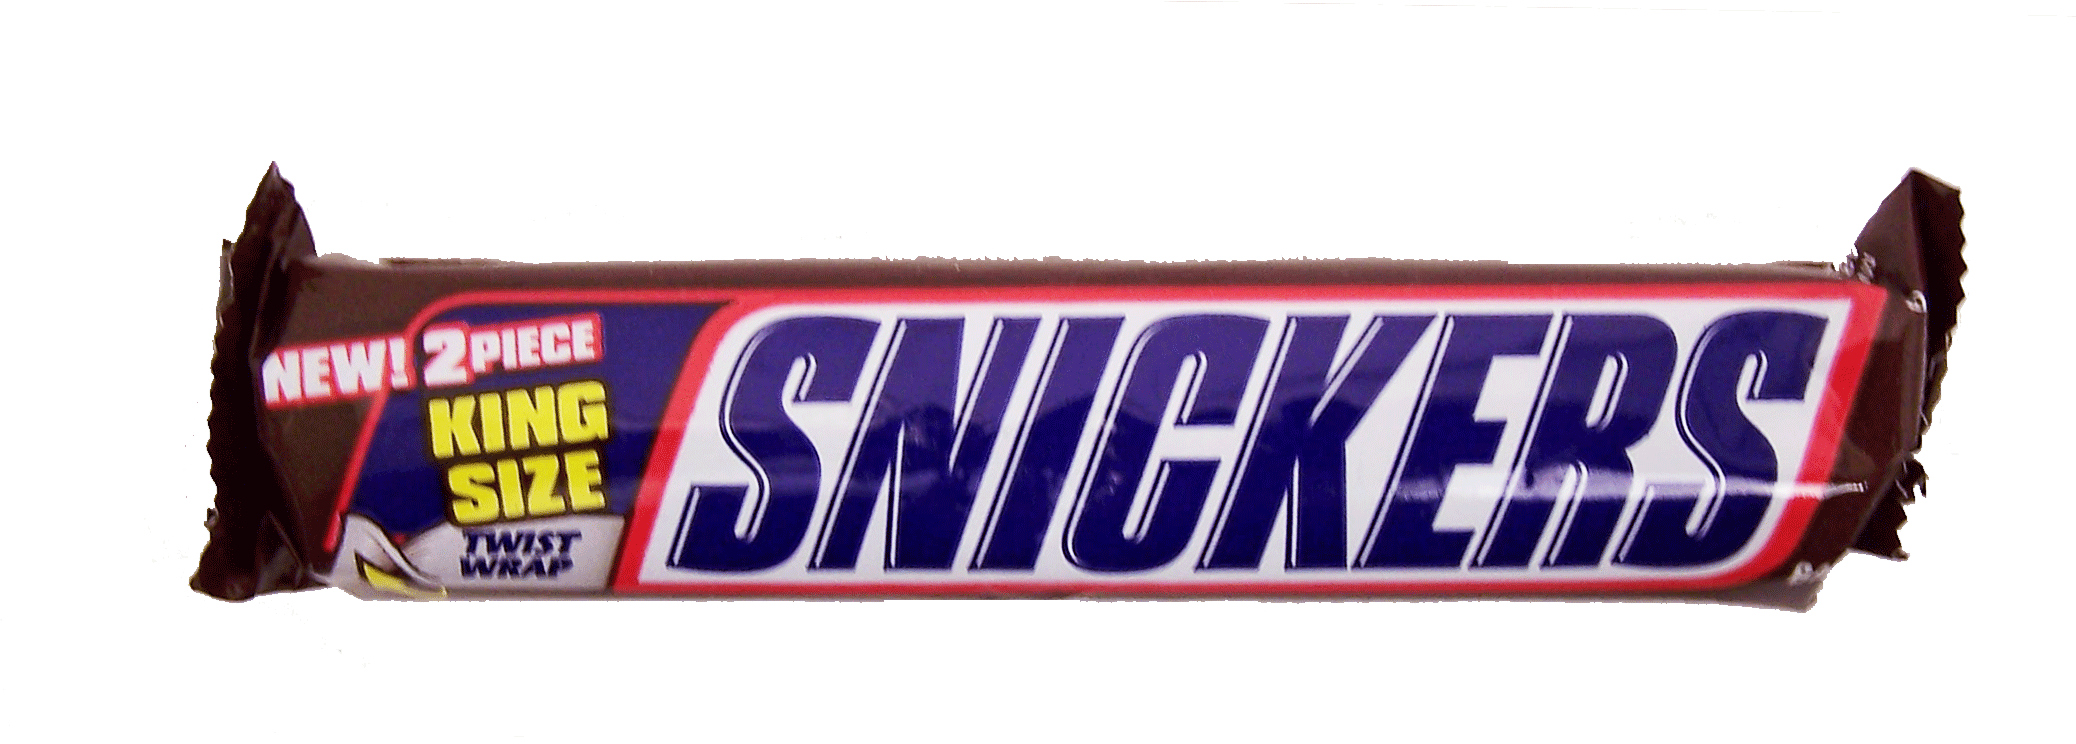 Snickers(r)  2 piece king size Full-Size Picture